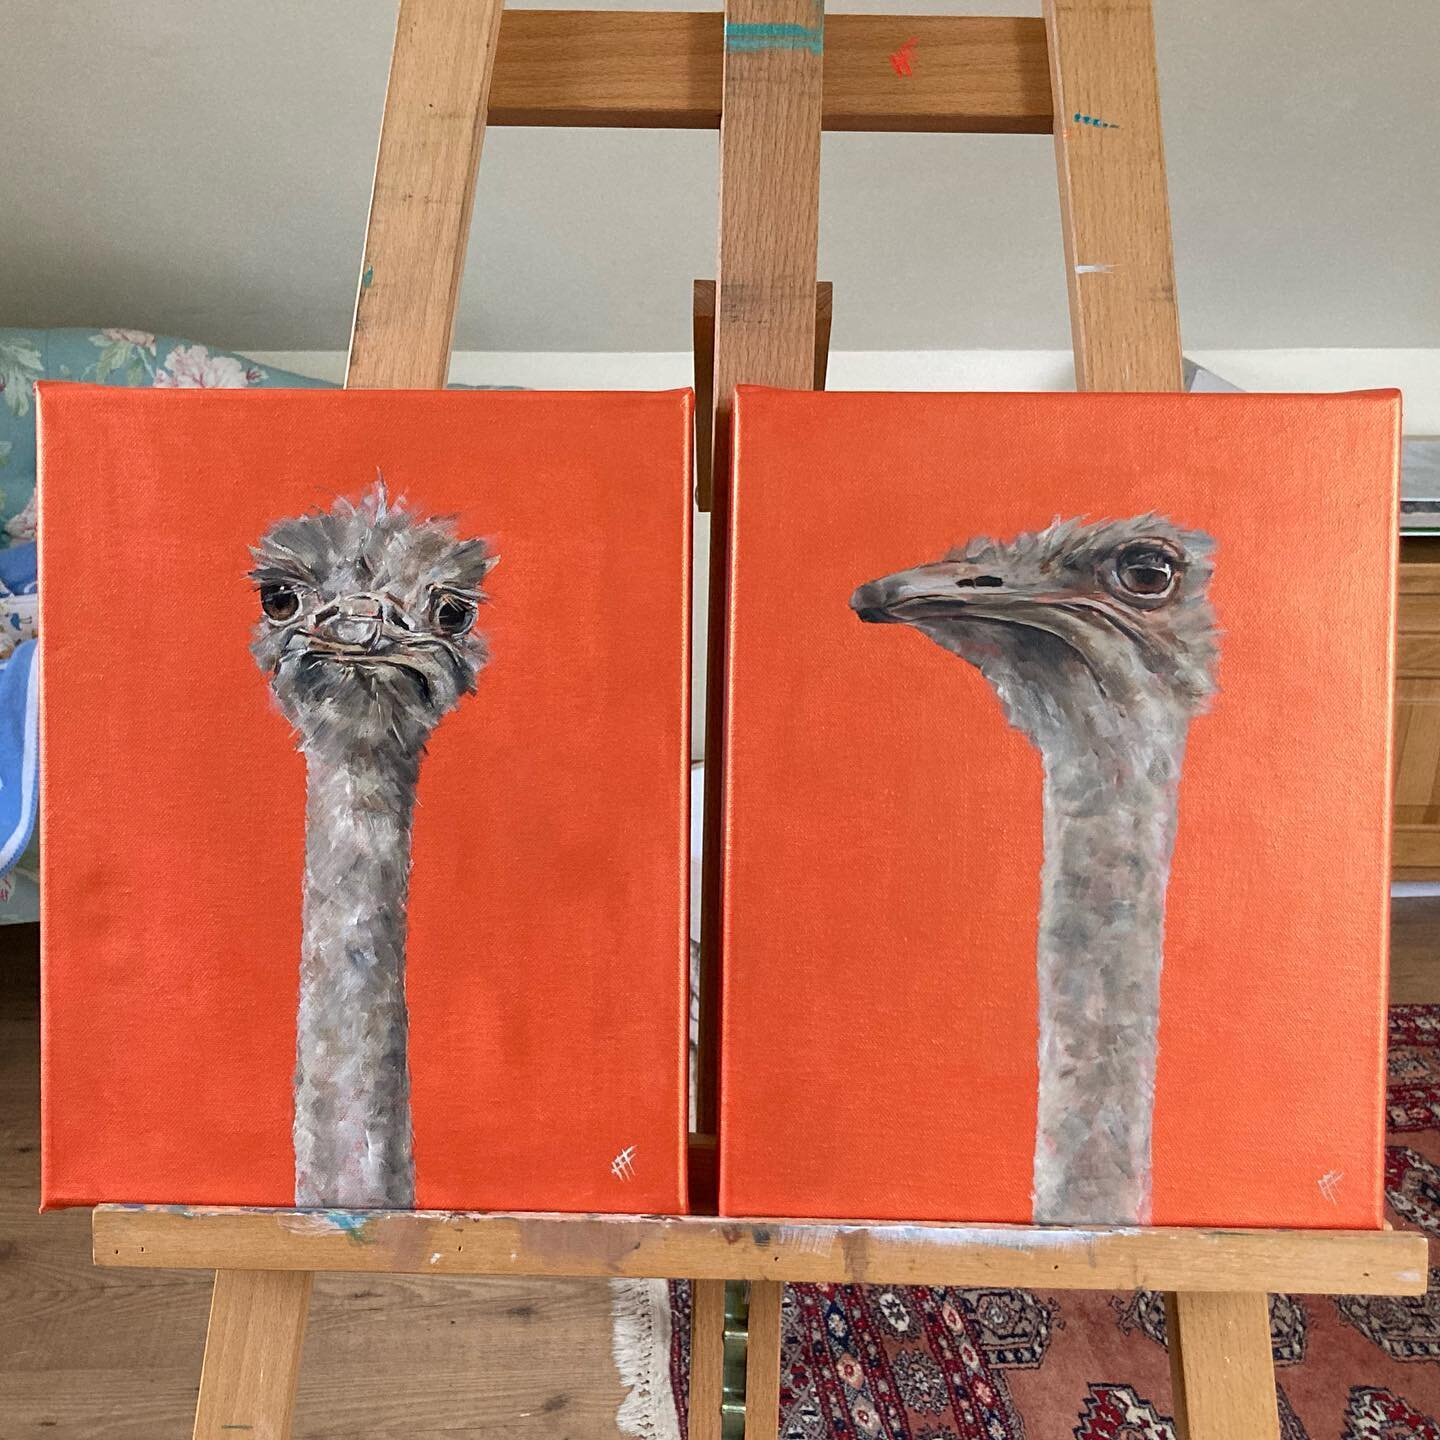 Otis and Oswald, two orange ostriches ready for the framers&hellip; 🧡

Oil and acrylic on 11x14 inch box canvases. For sale on the website (price to include framing). 

https://www.hannahtreliving.com/originals-shop

#originalart #contemporaryart #a